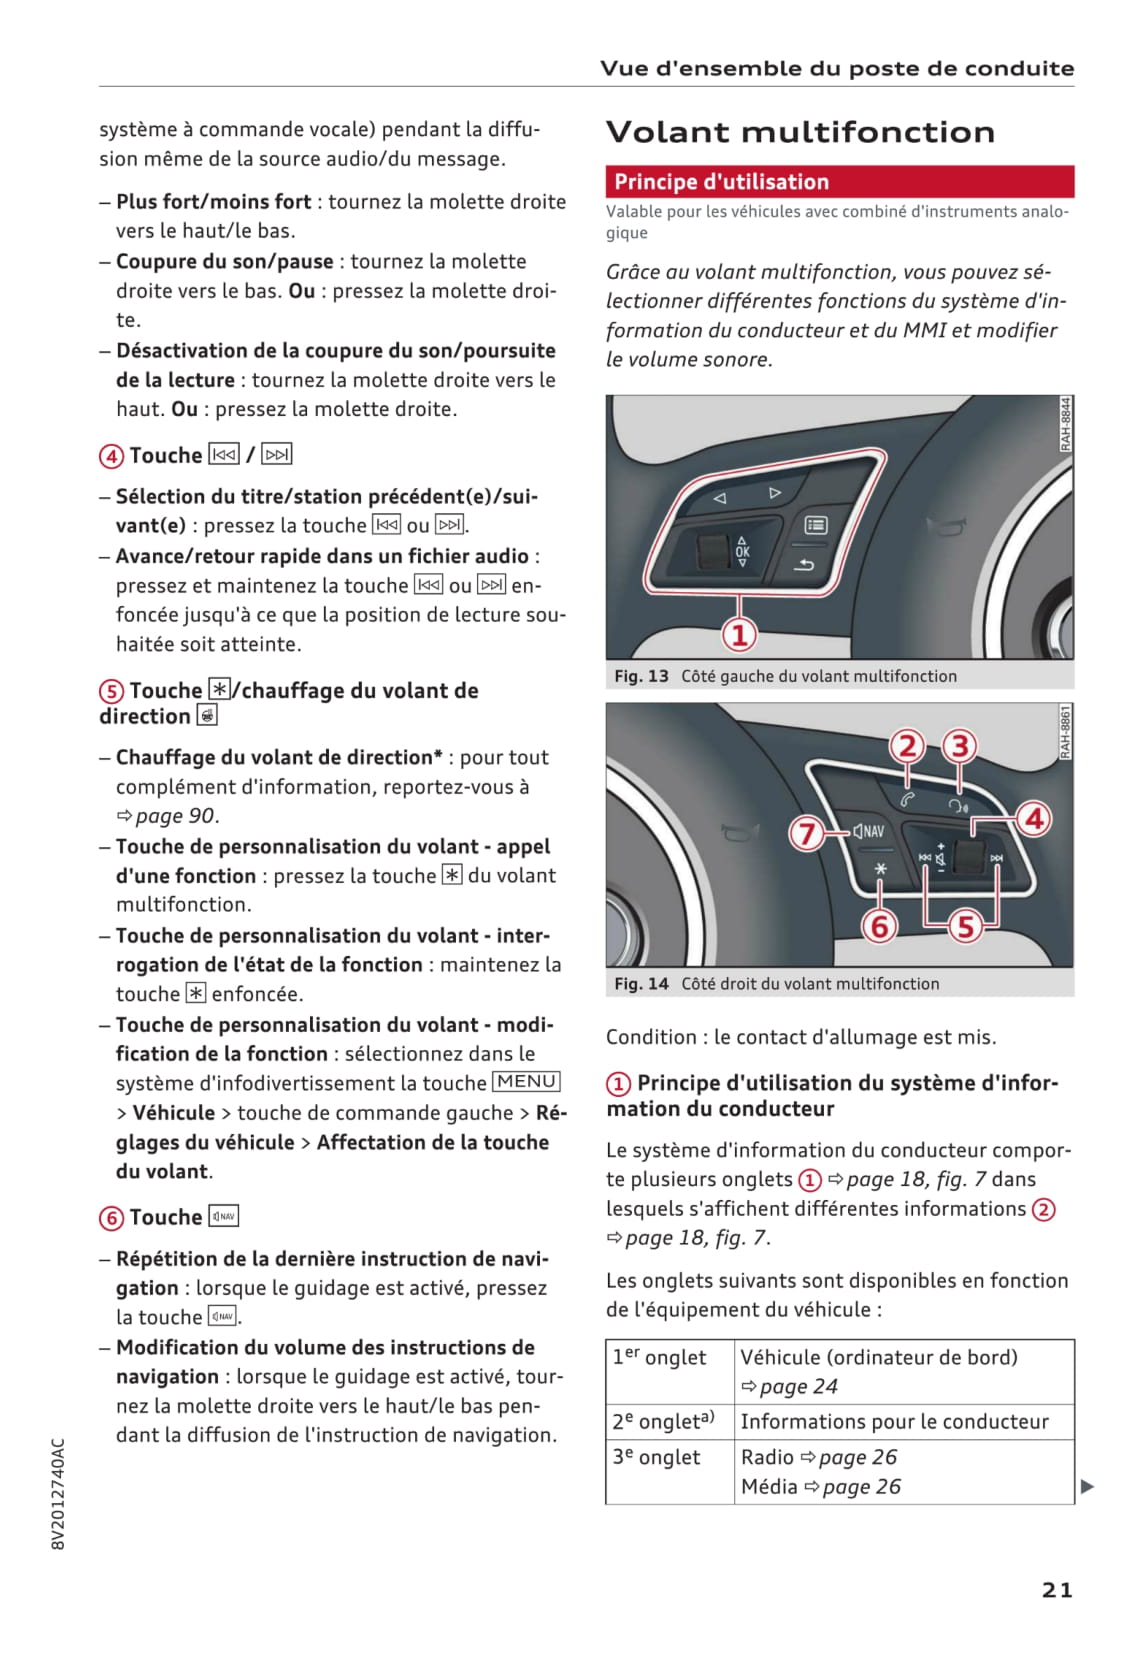 2016-2017 Audi A3 Owner's Manual | French